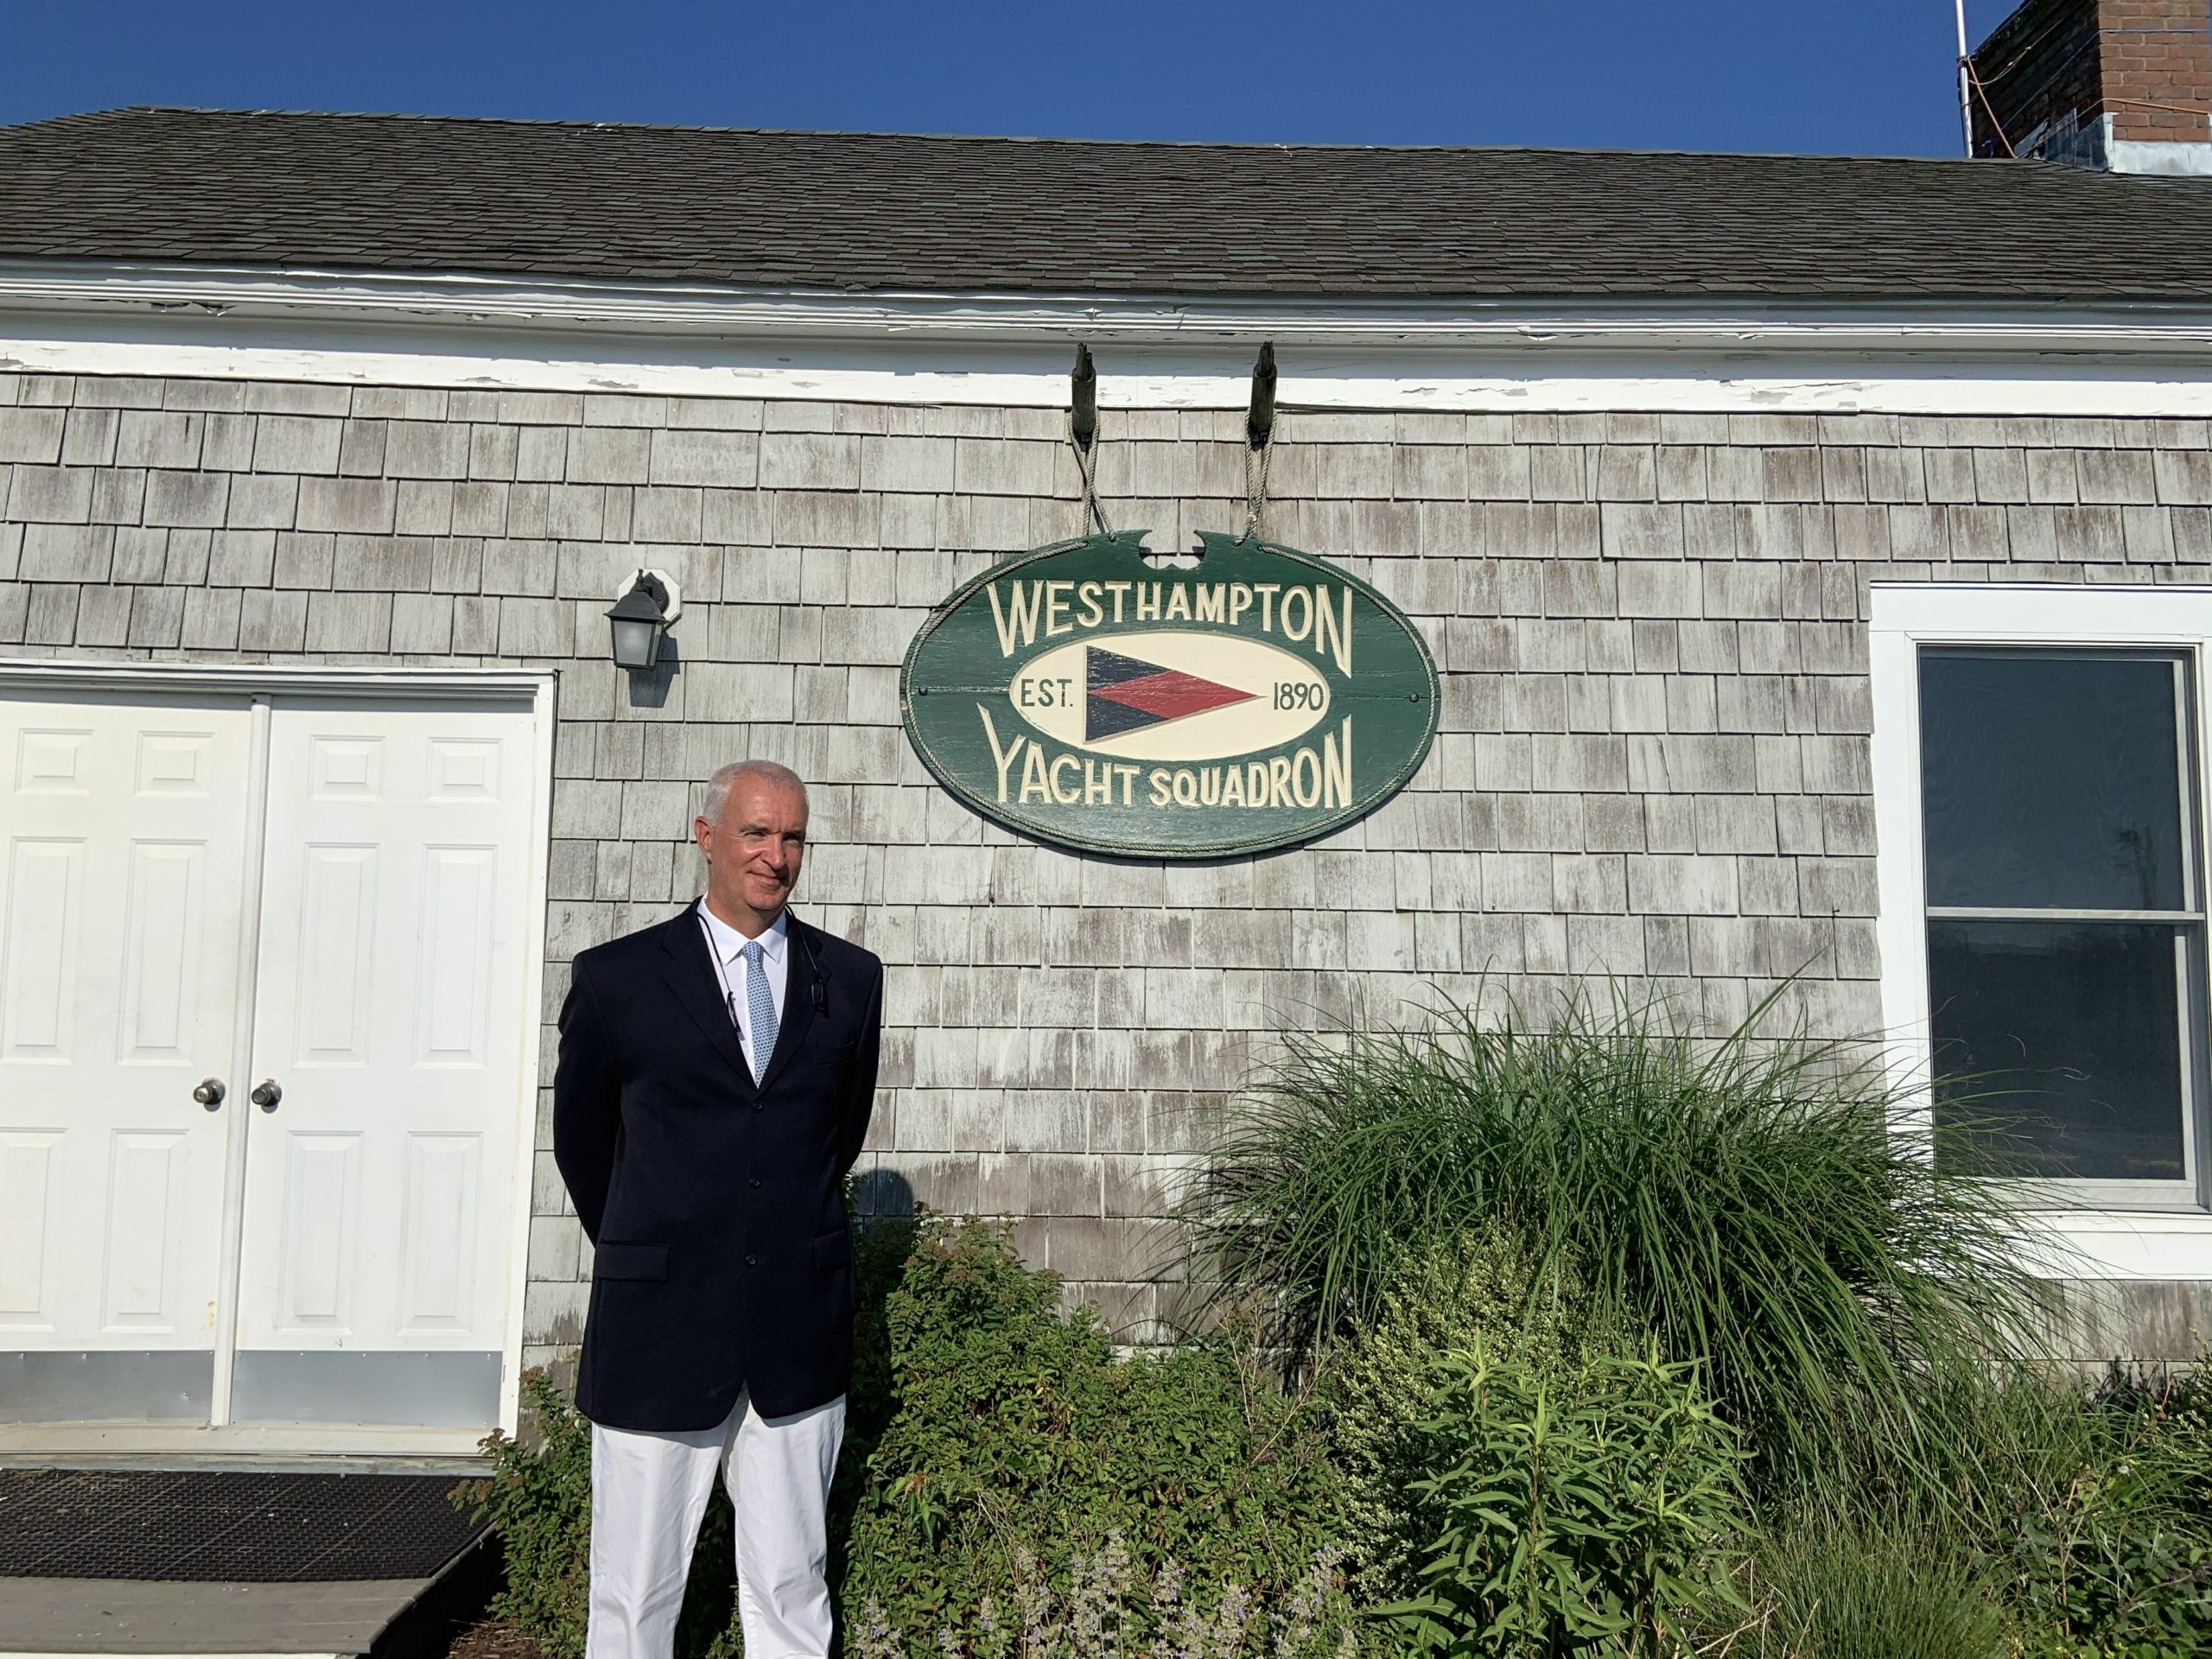 Commodore J.M. Sheehan in front of the original clubhouse signage.